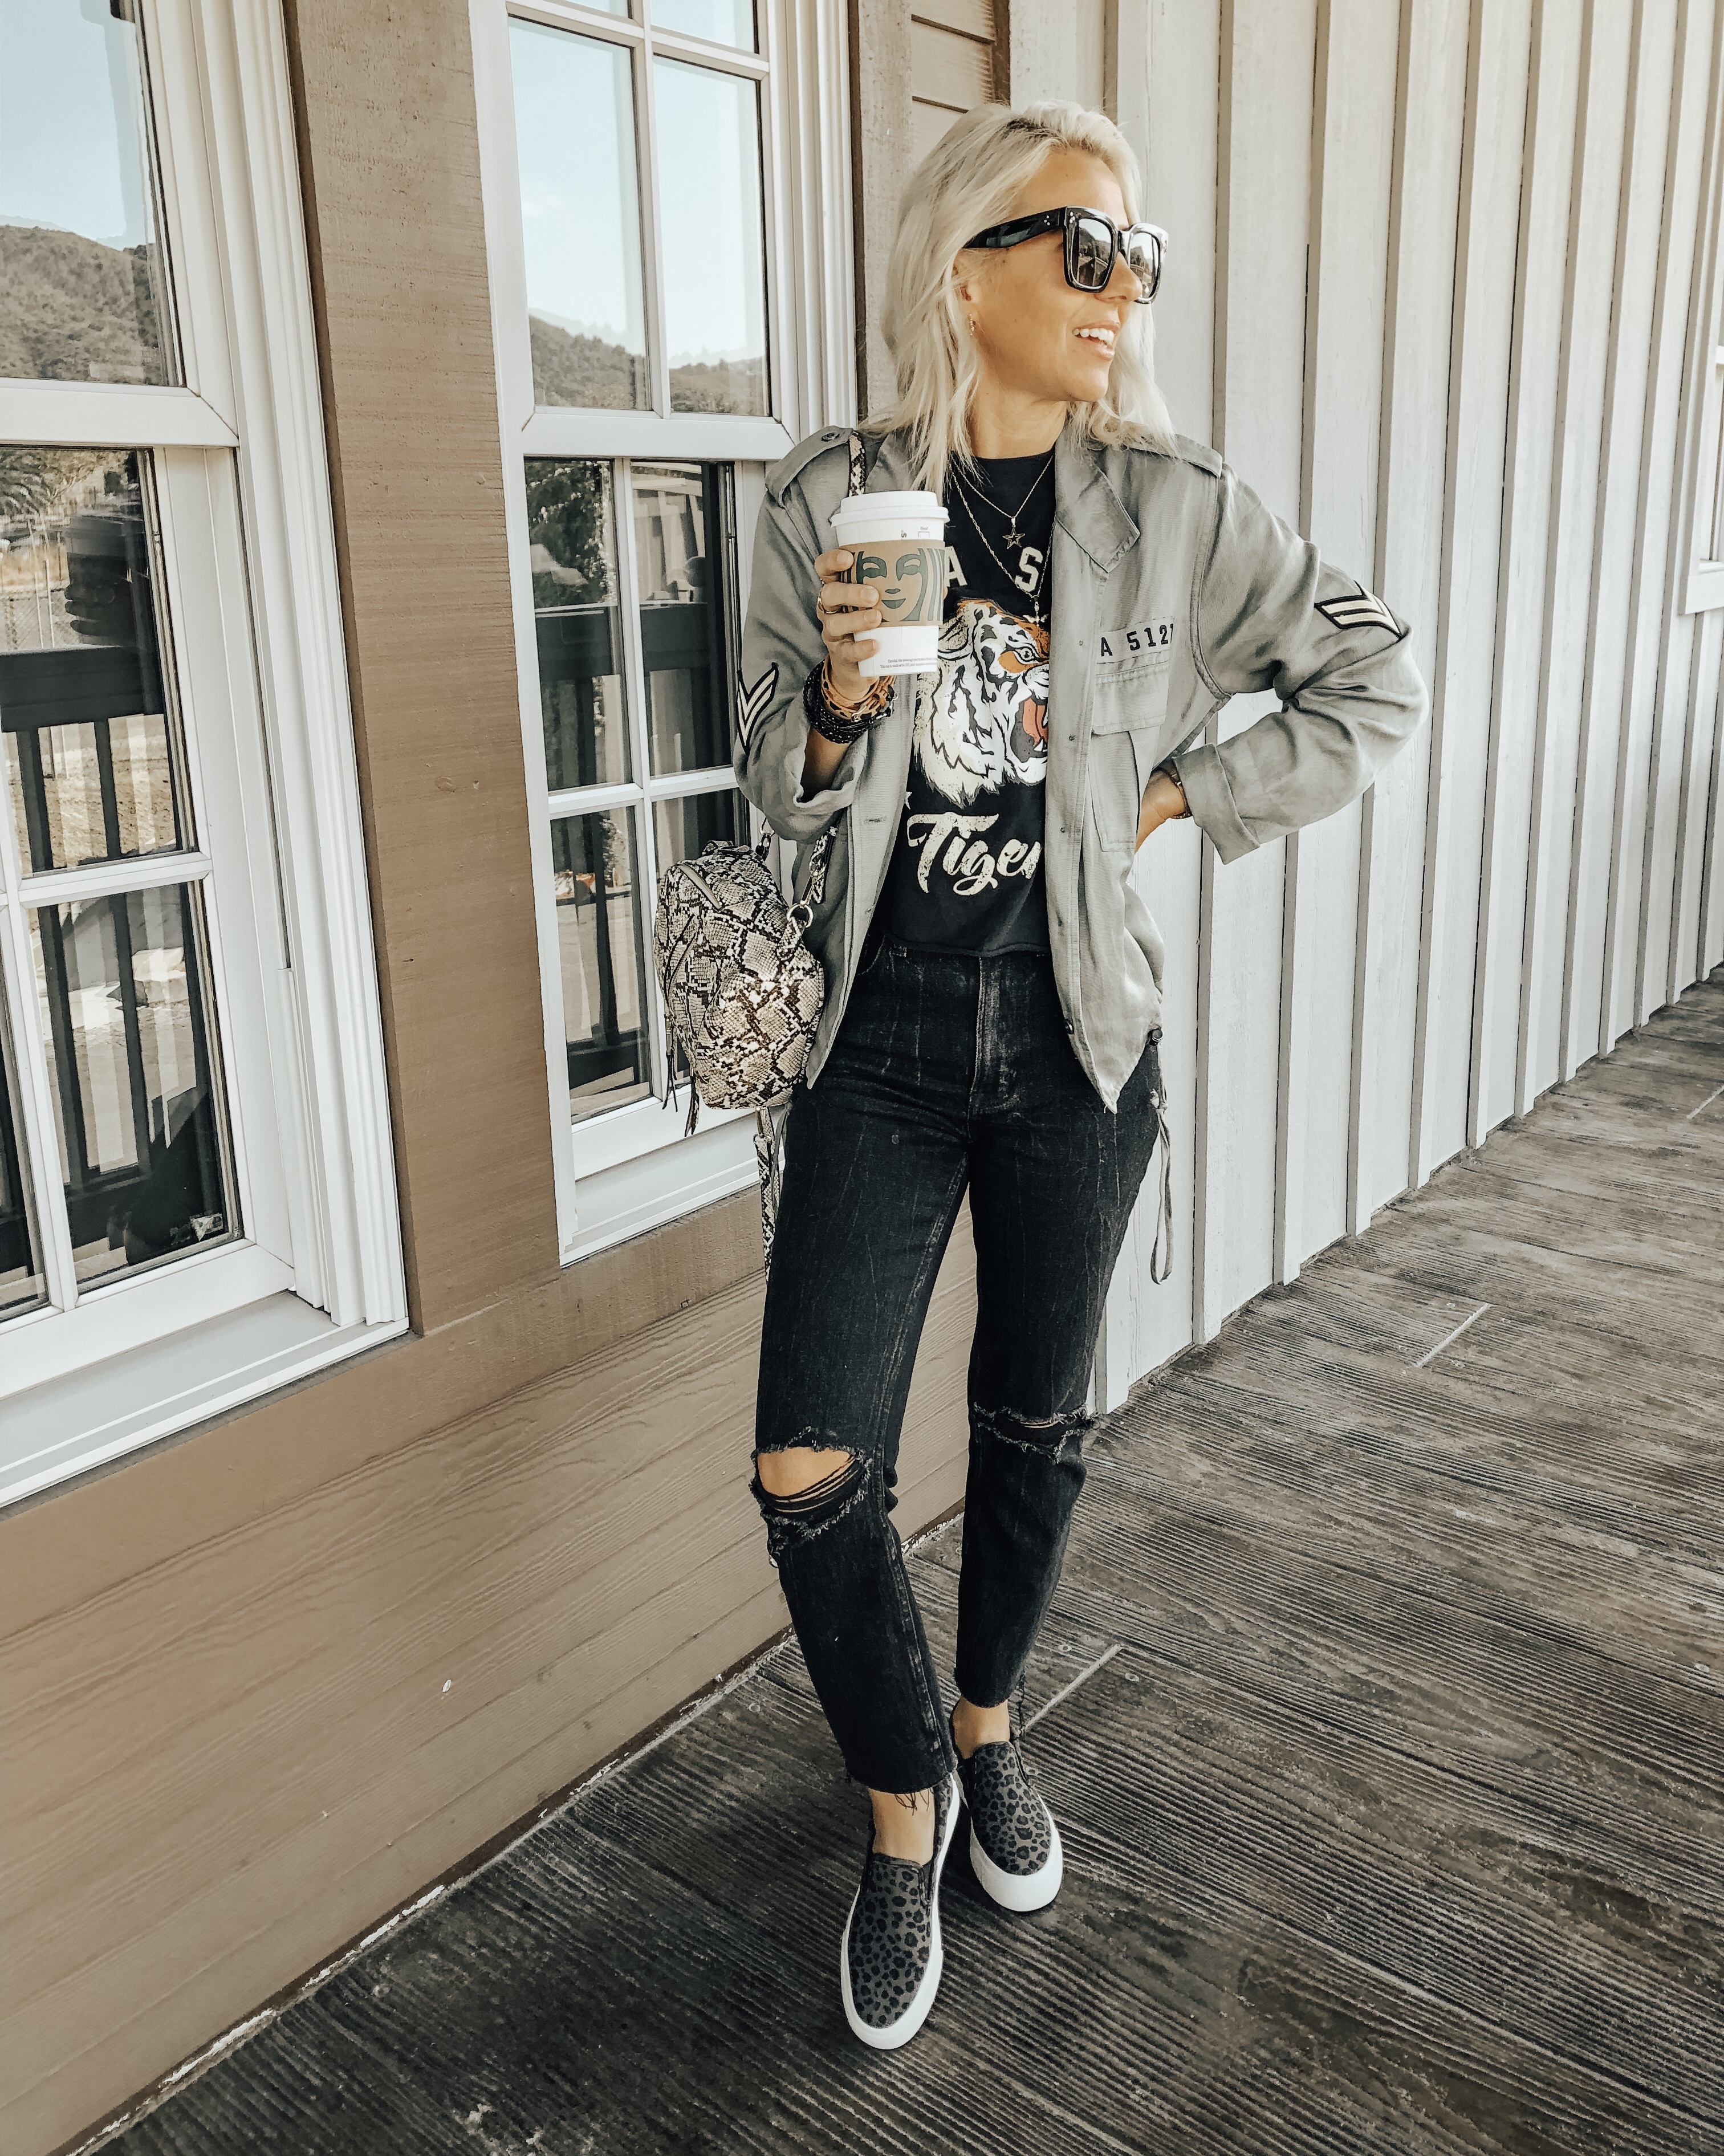 ALL ABOUT DENIM- MY CURRENT FAVORITES + NEW TRENDS FOR FALL- Jaclyn De Leon Style + sharing all my denim must have's from my favorite mom jeans, high rise skinny jeans and so much more. Of course all my denim is affordable and easy to wear with everything in your closet.